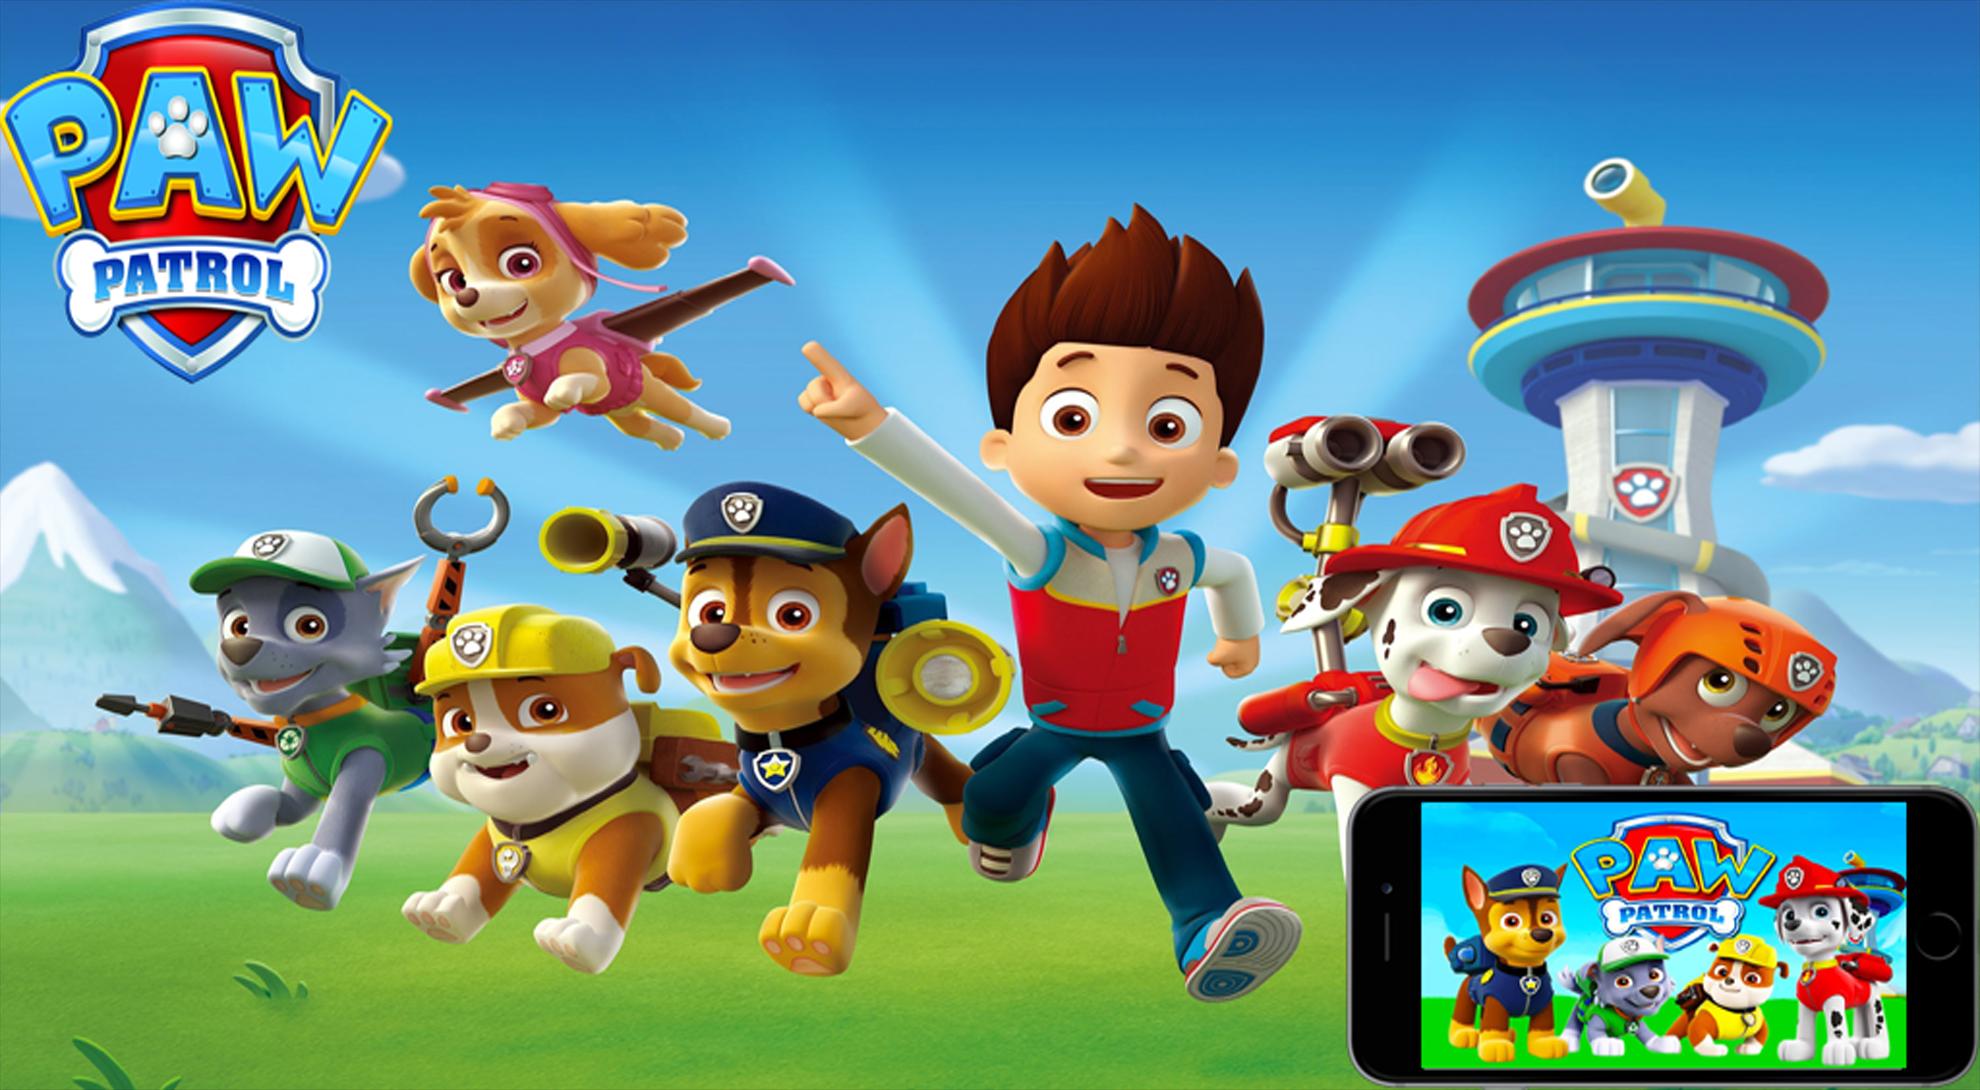 Games paw patrol for Android - APK Download